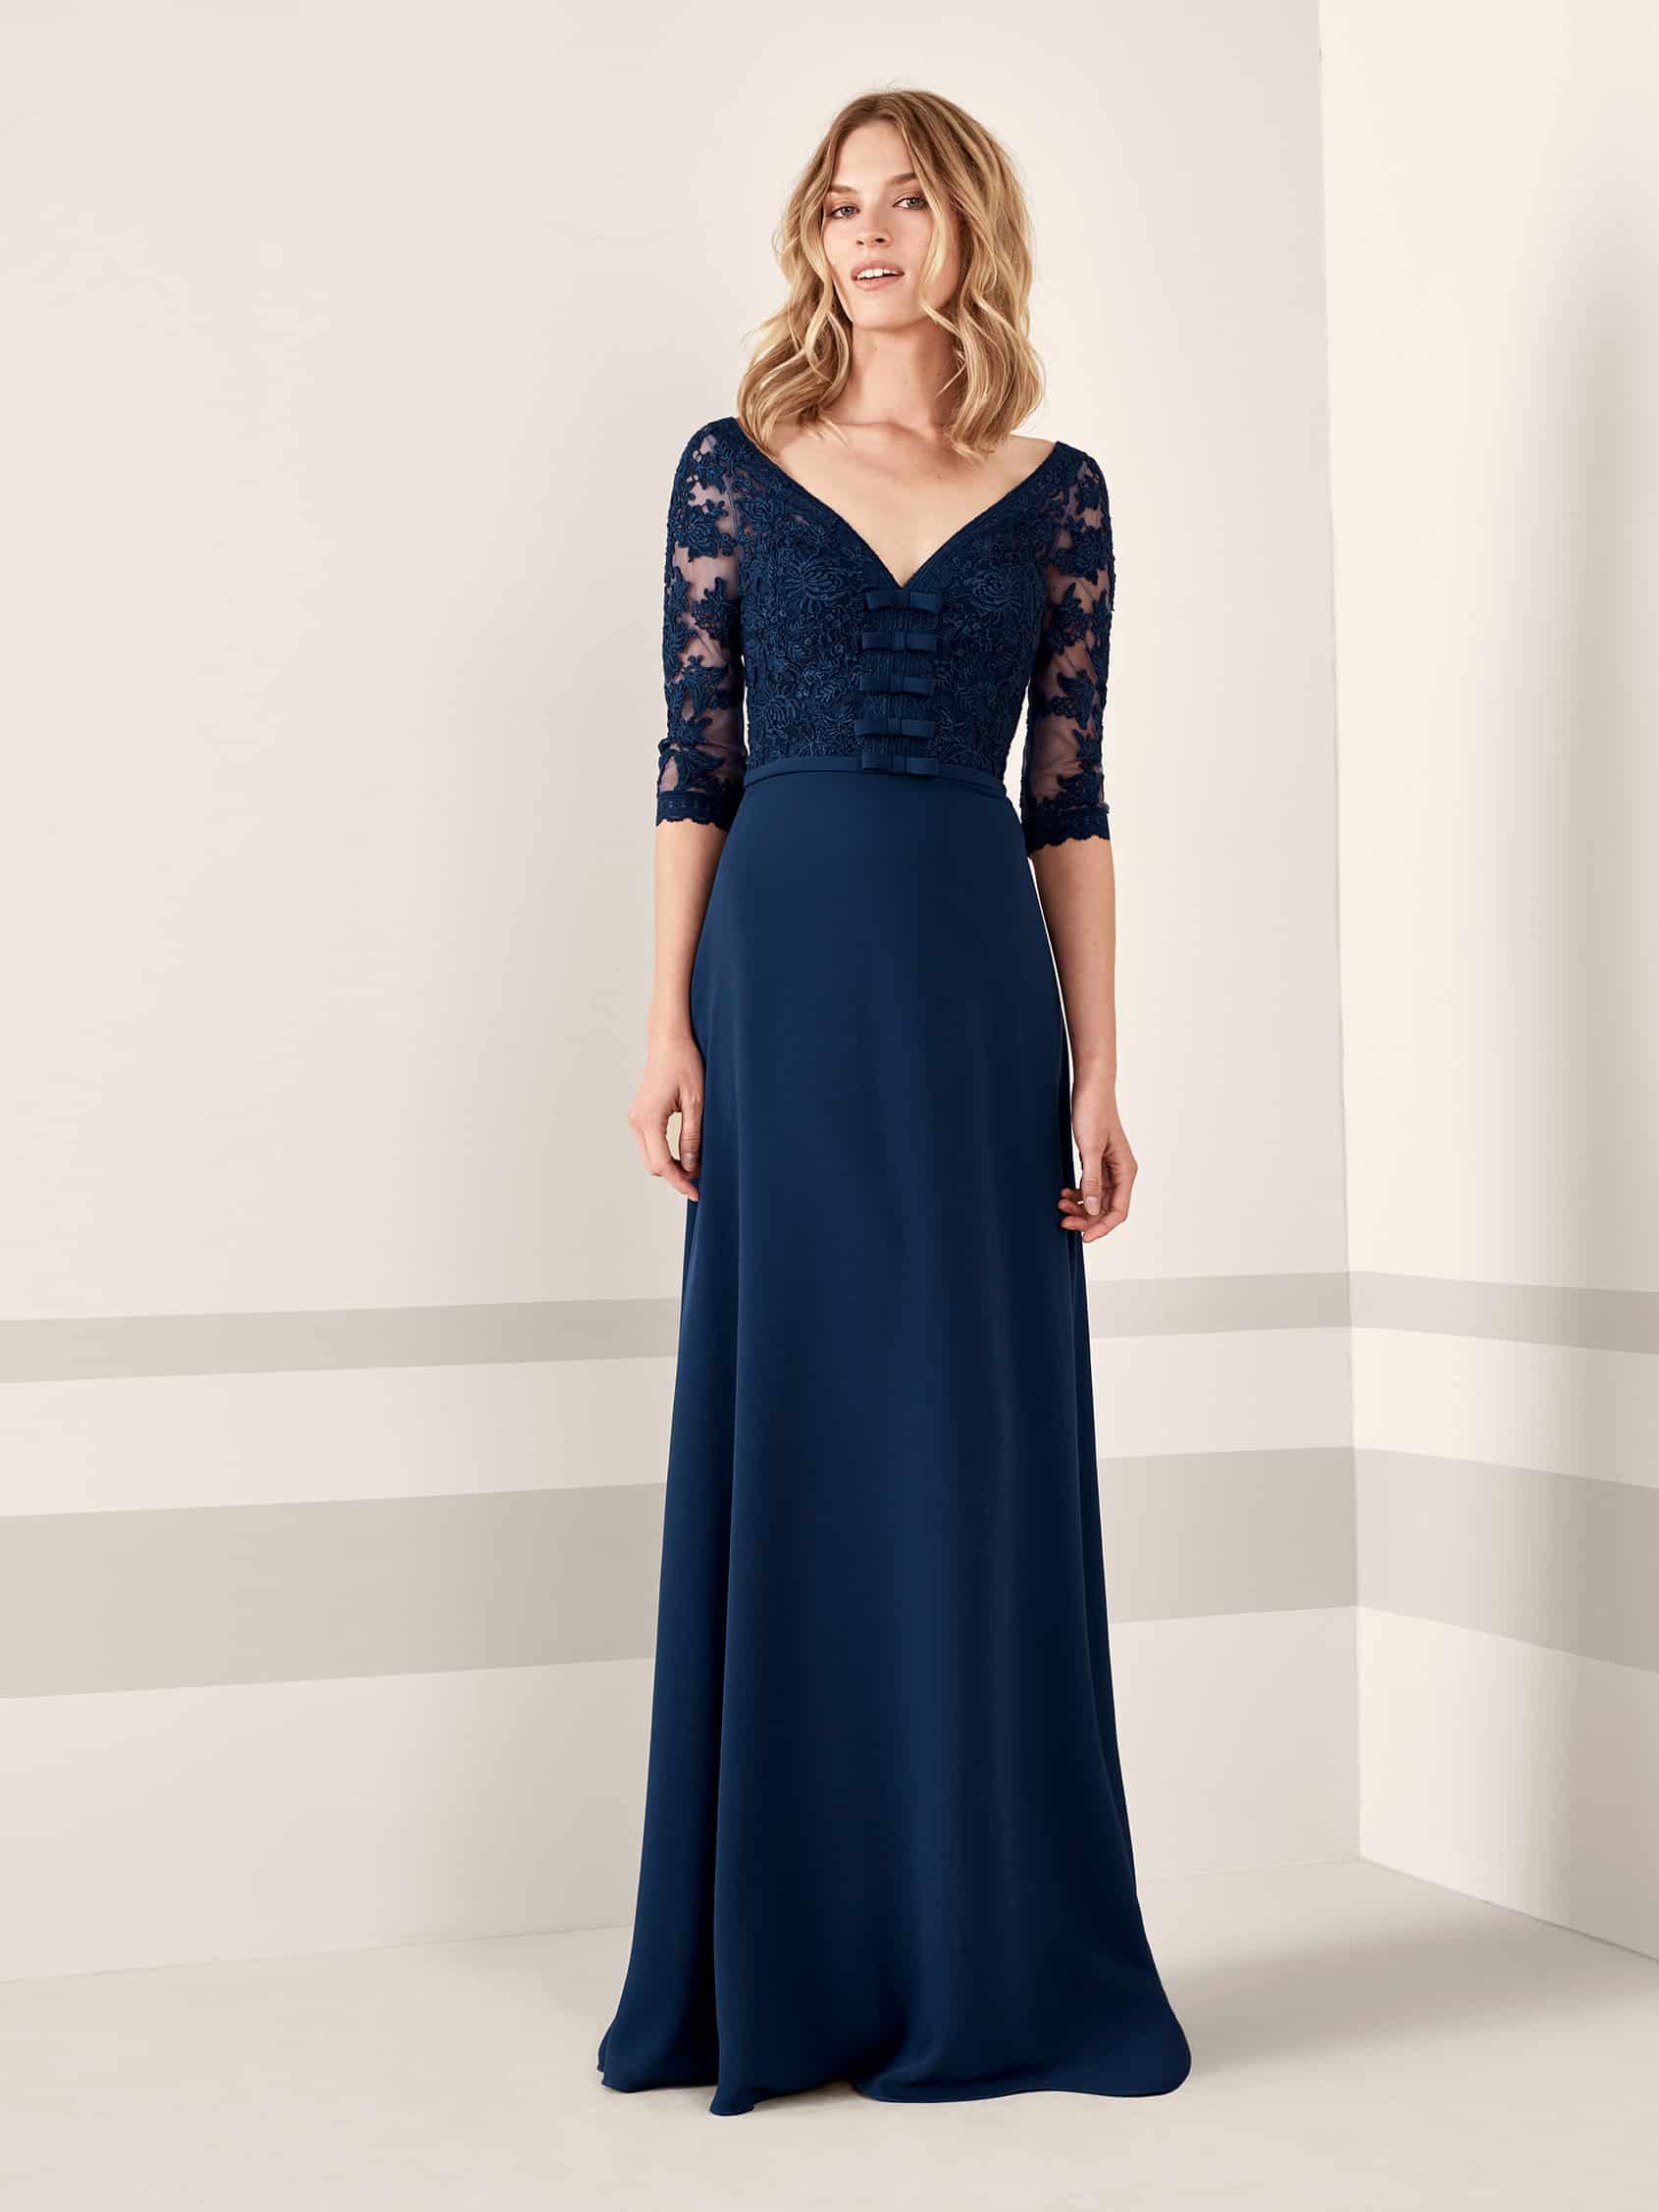 Lace Top A-Line Long Dress with V-Neckline and Bows.JPG